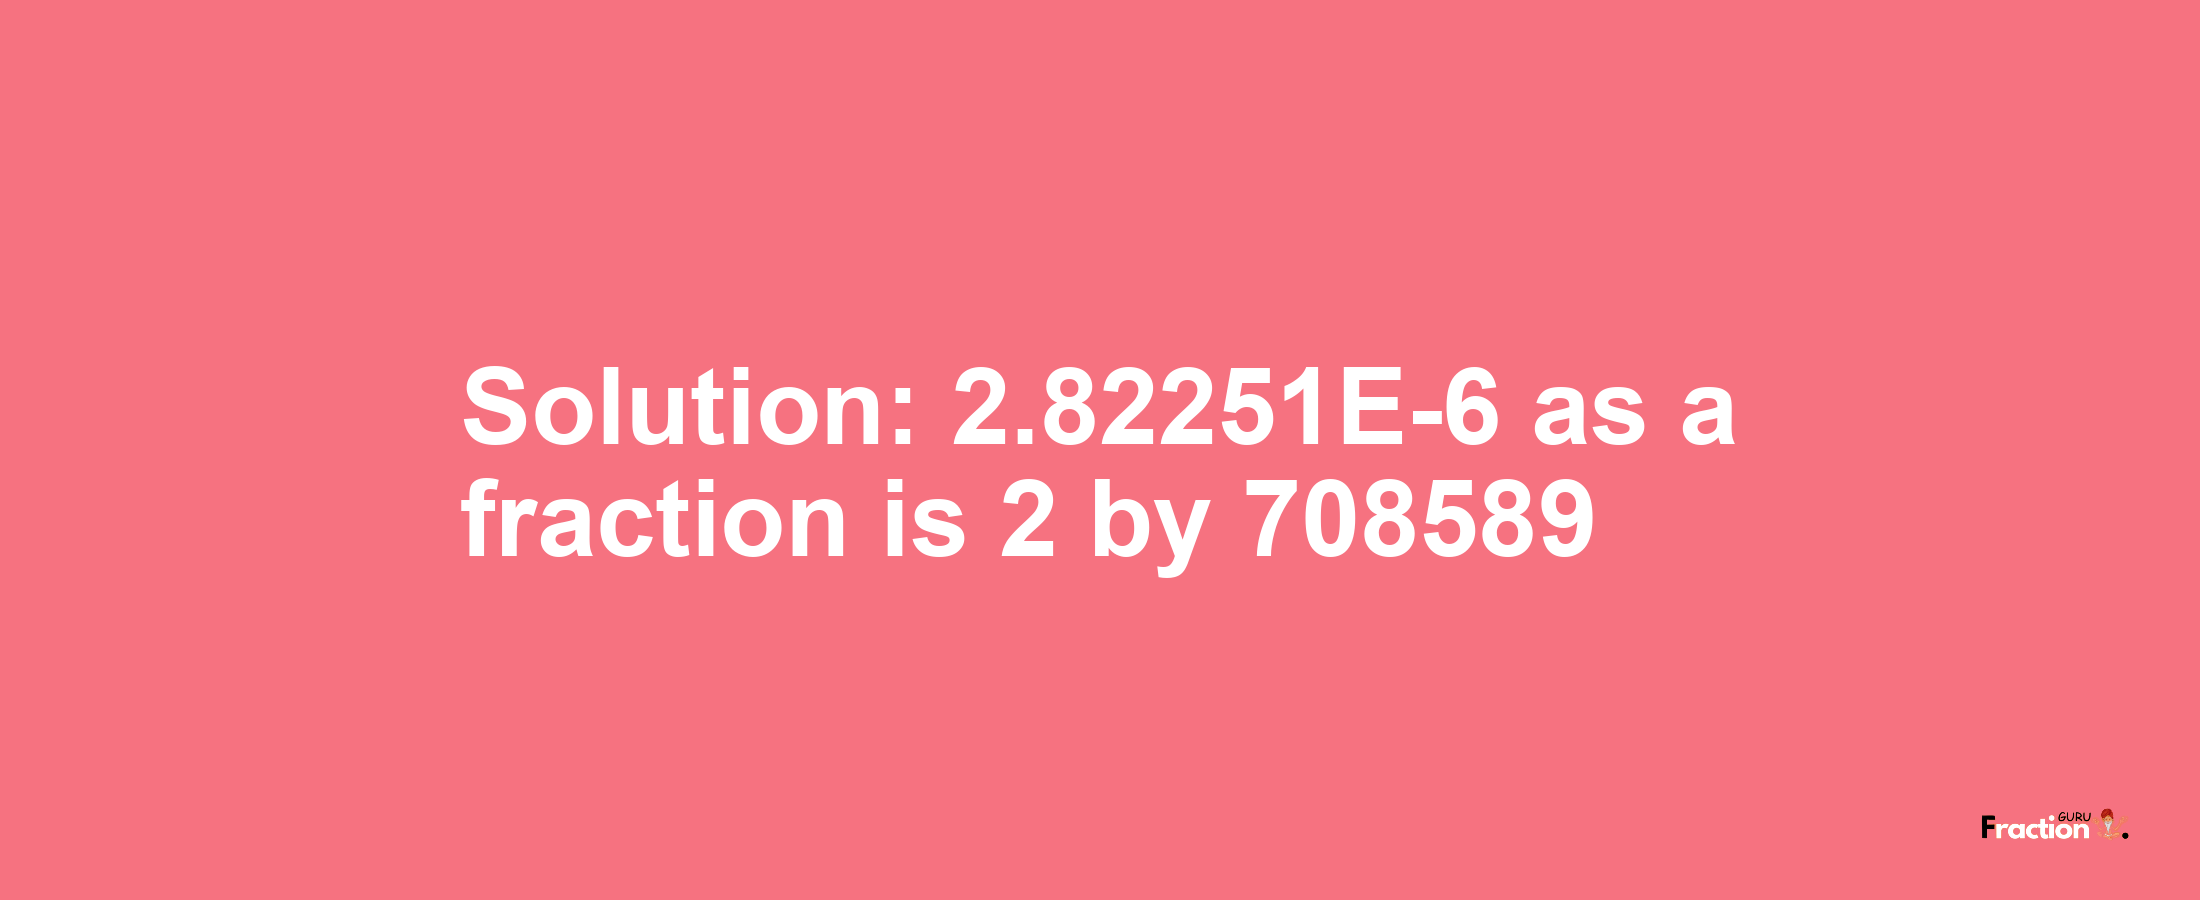 Solution:2.82251E-6 as a fraction is 2/708589